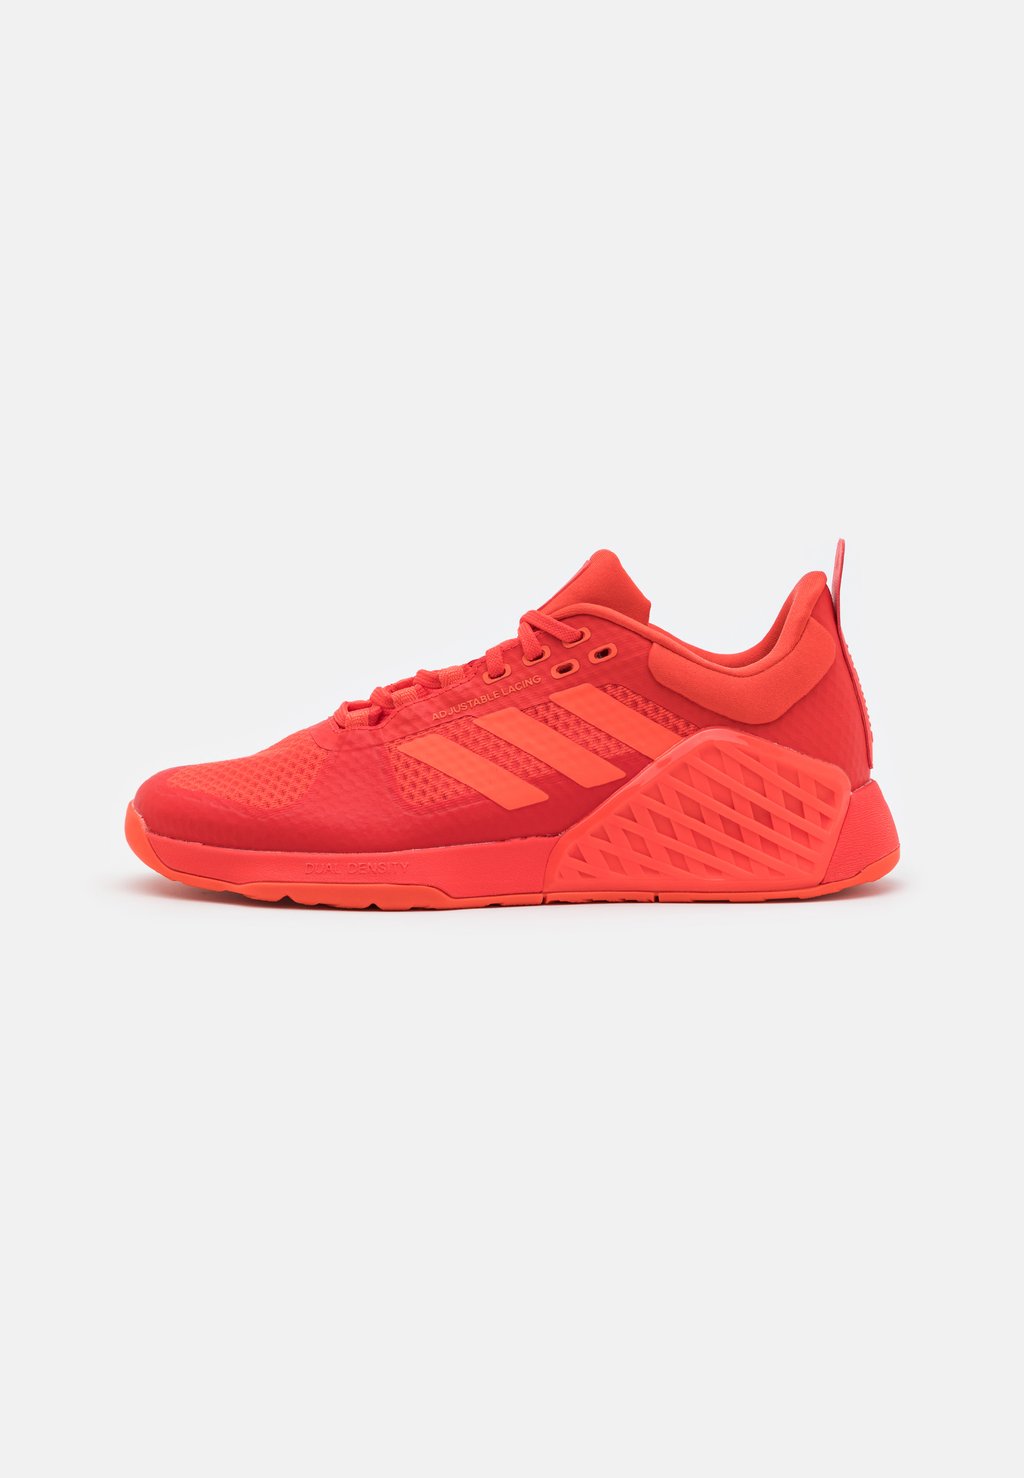 Кроссовки DROPSET 2 TRAINER adidas Performance, цвет bright red/solar red/shadow red